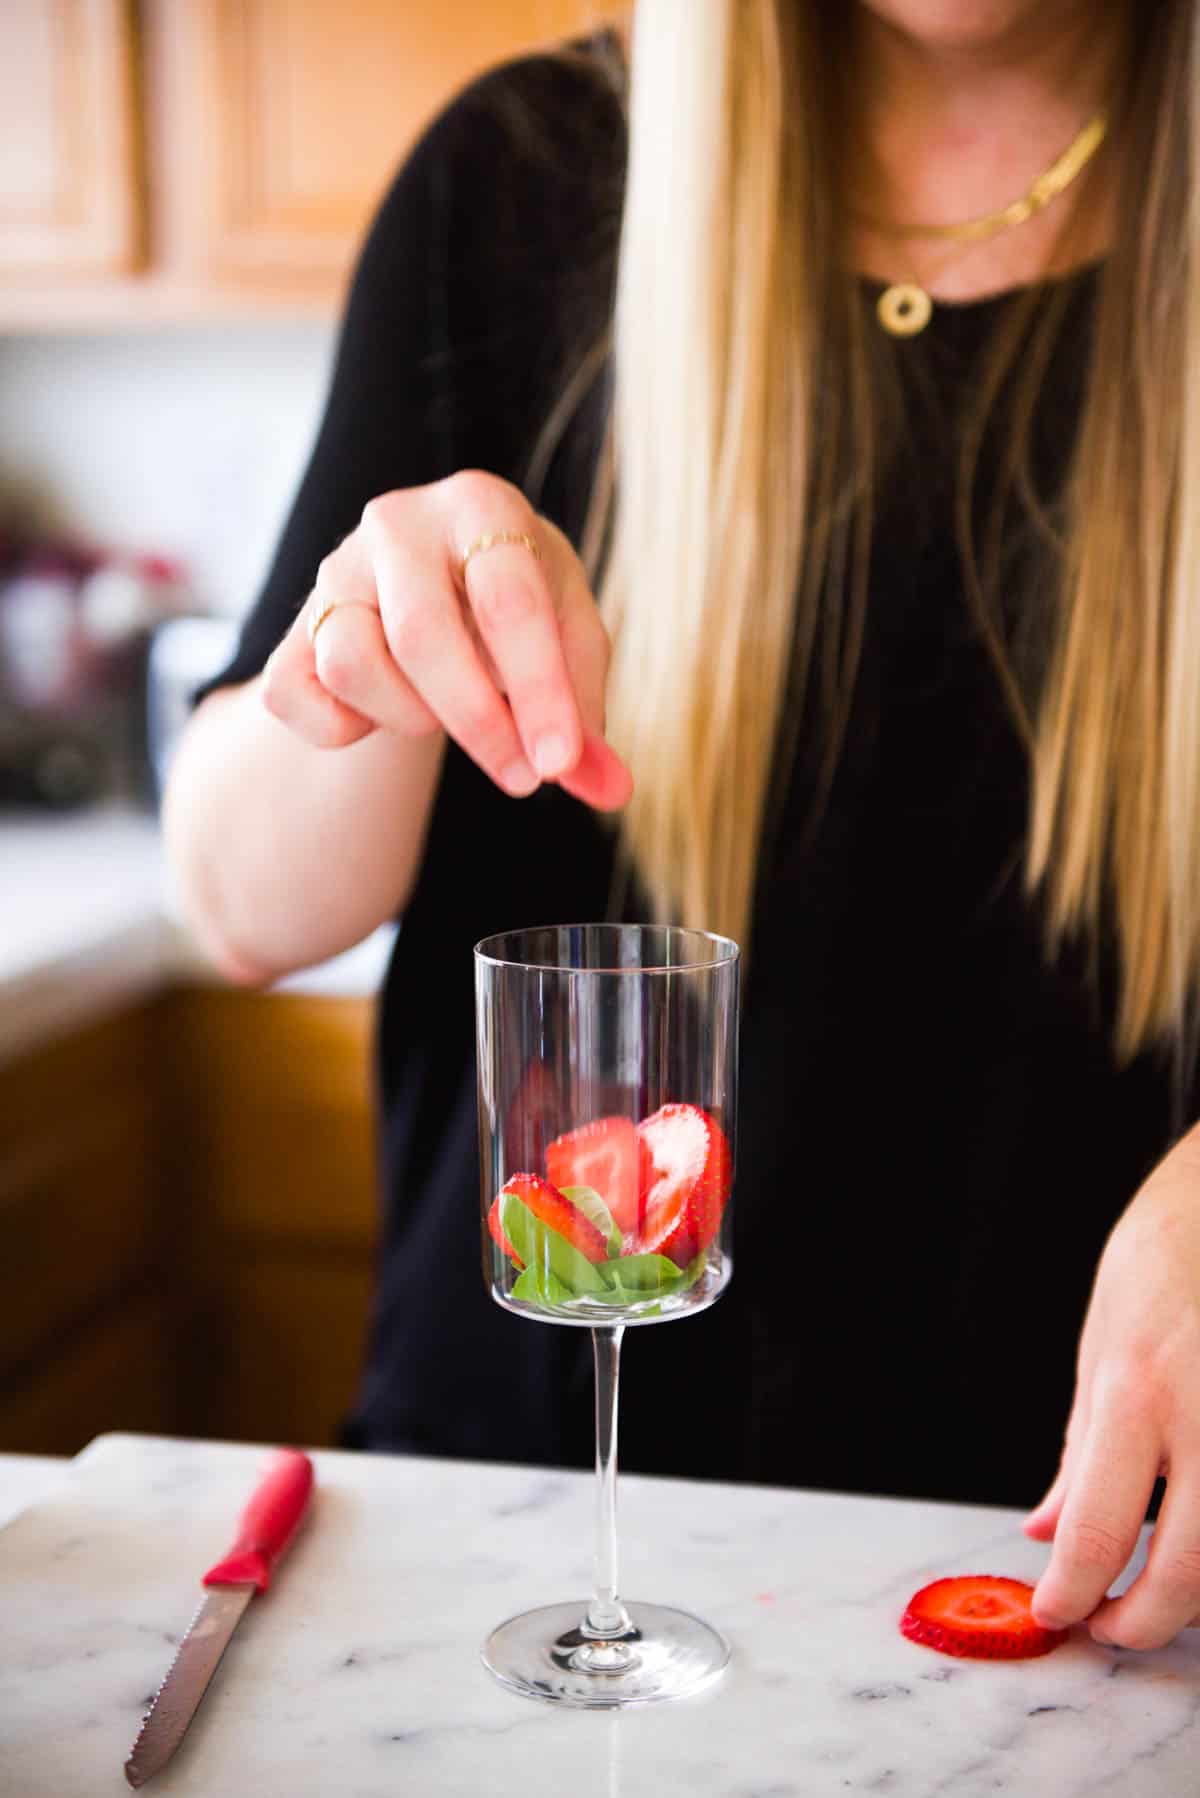 Adding sliced fresh strawberries to a wine glass for a drink recipe.